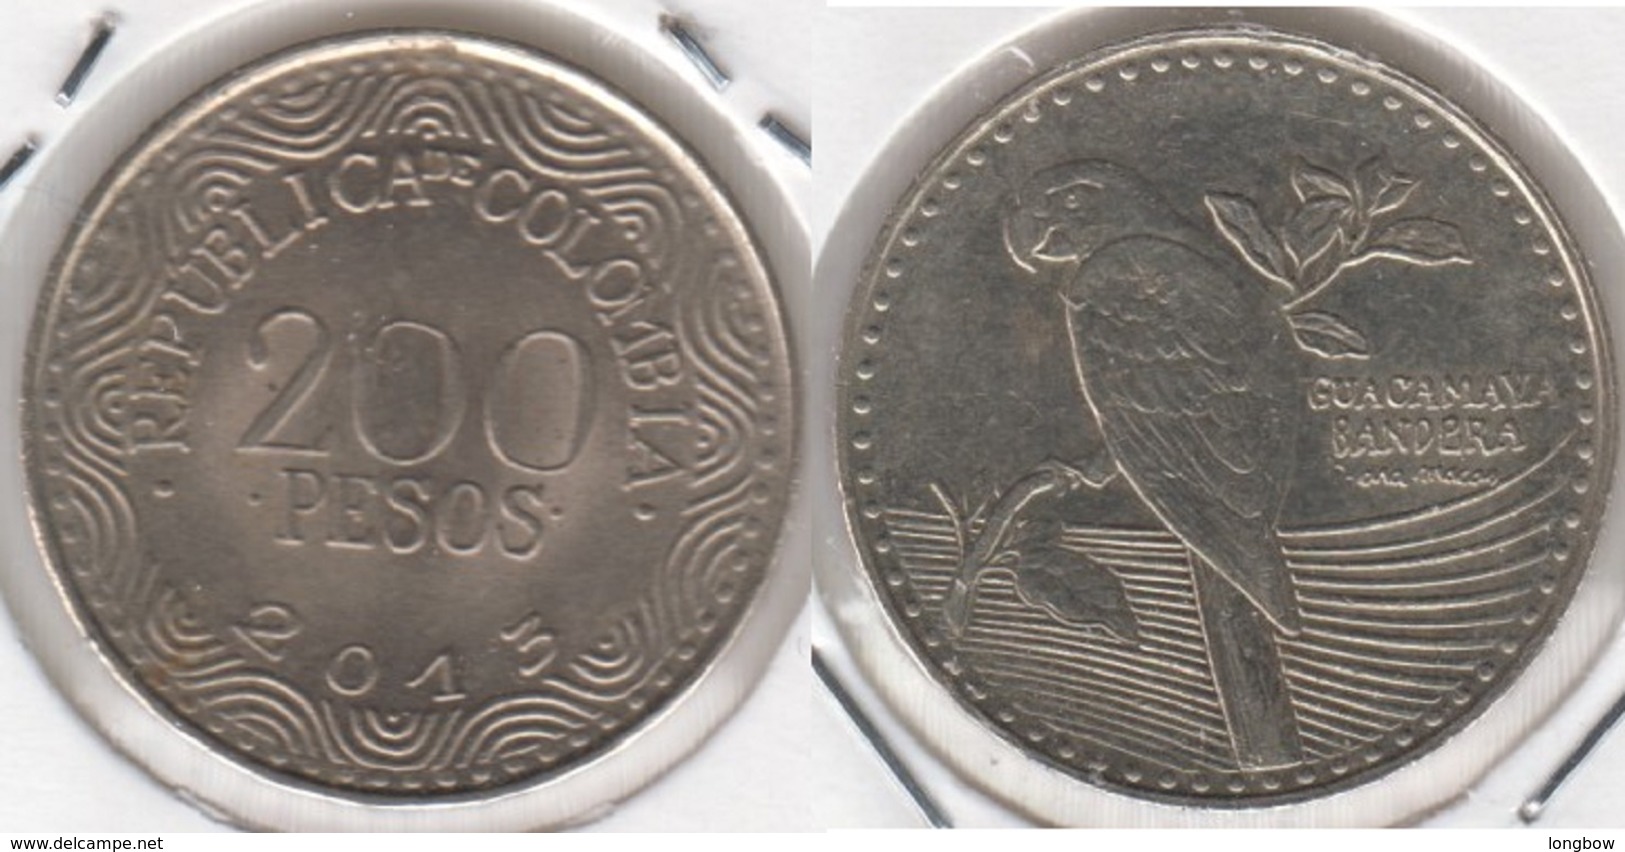 Colombia 200 Pesos 2013 Parrot KM#297 - Used - Colombia